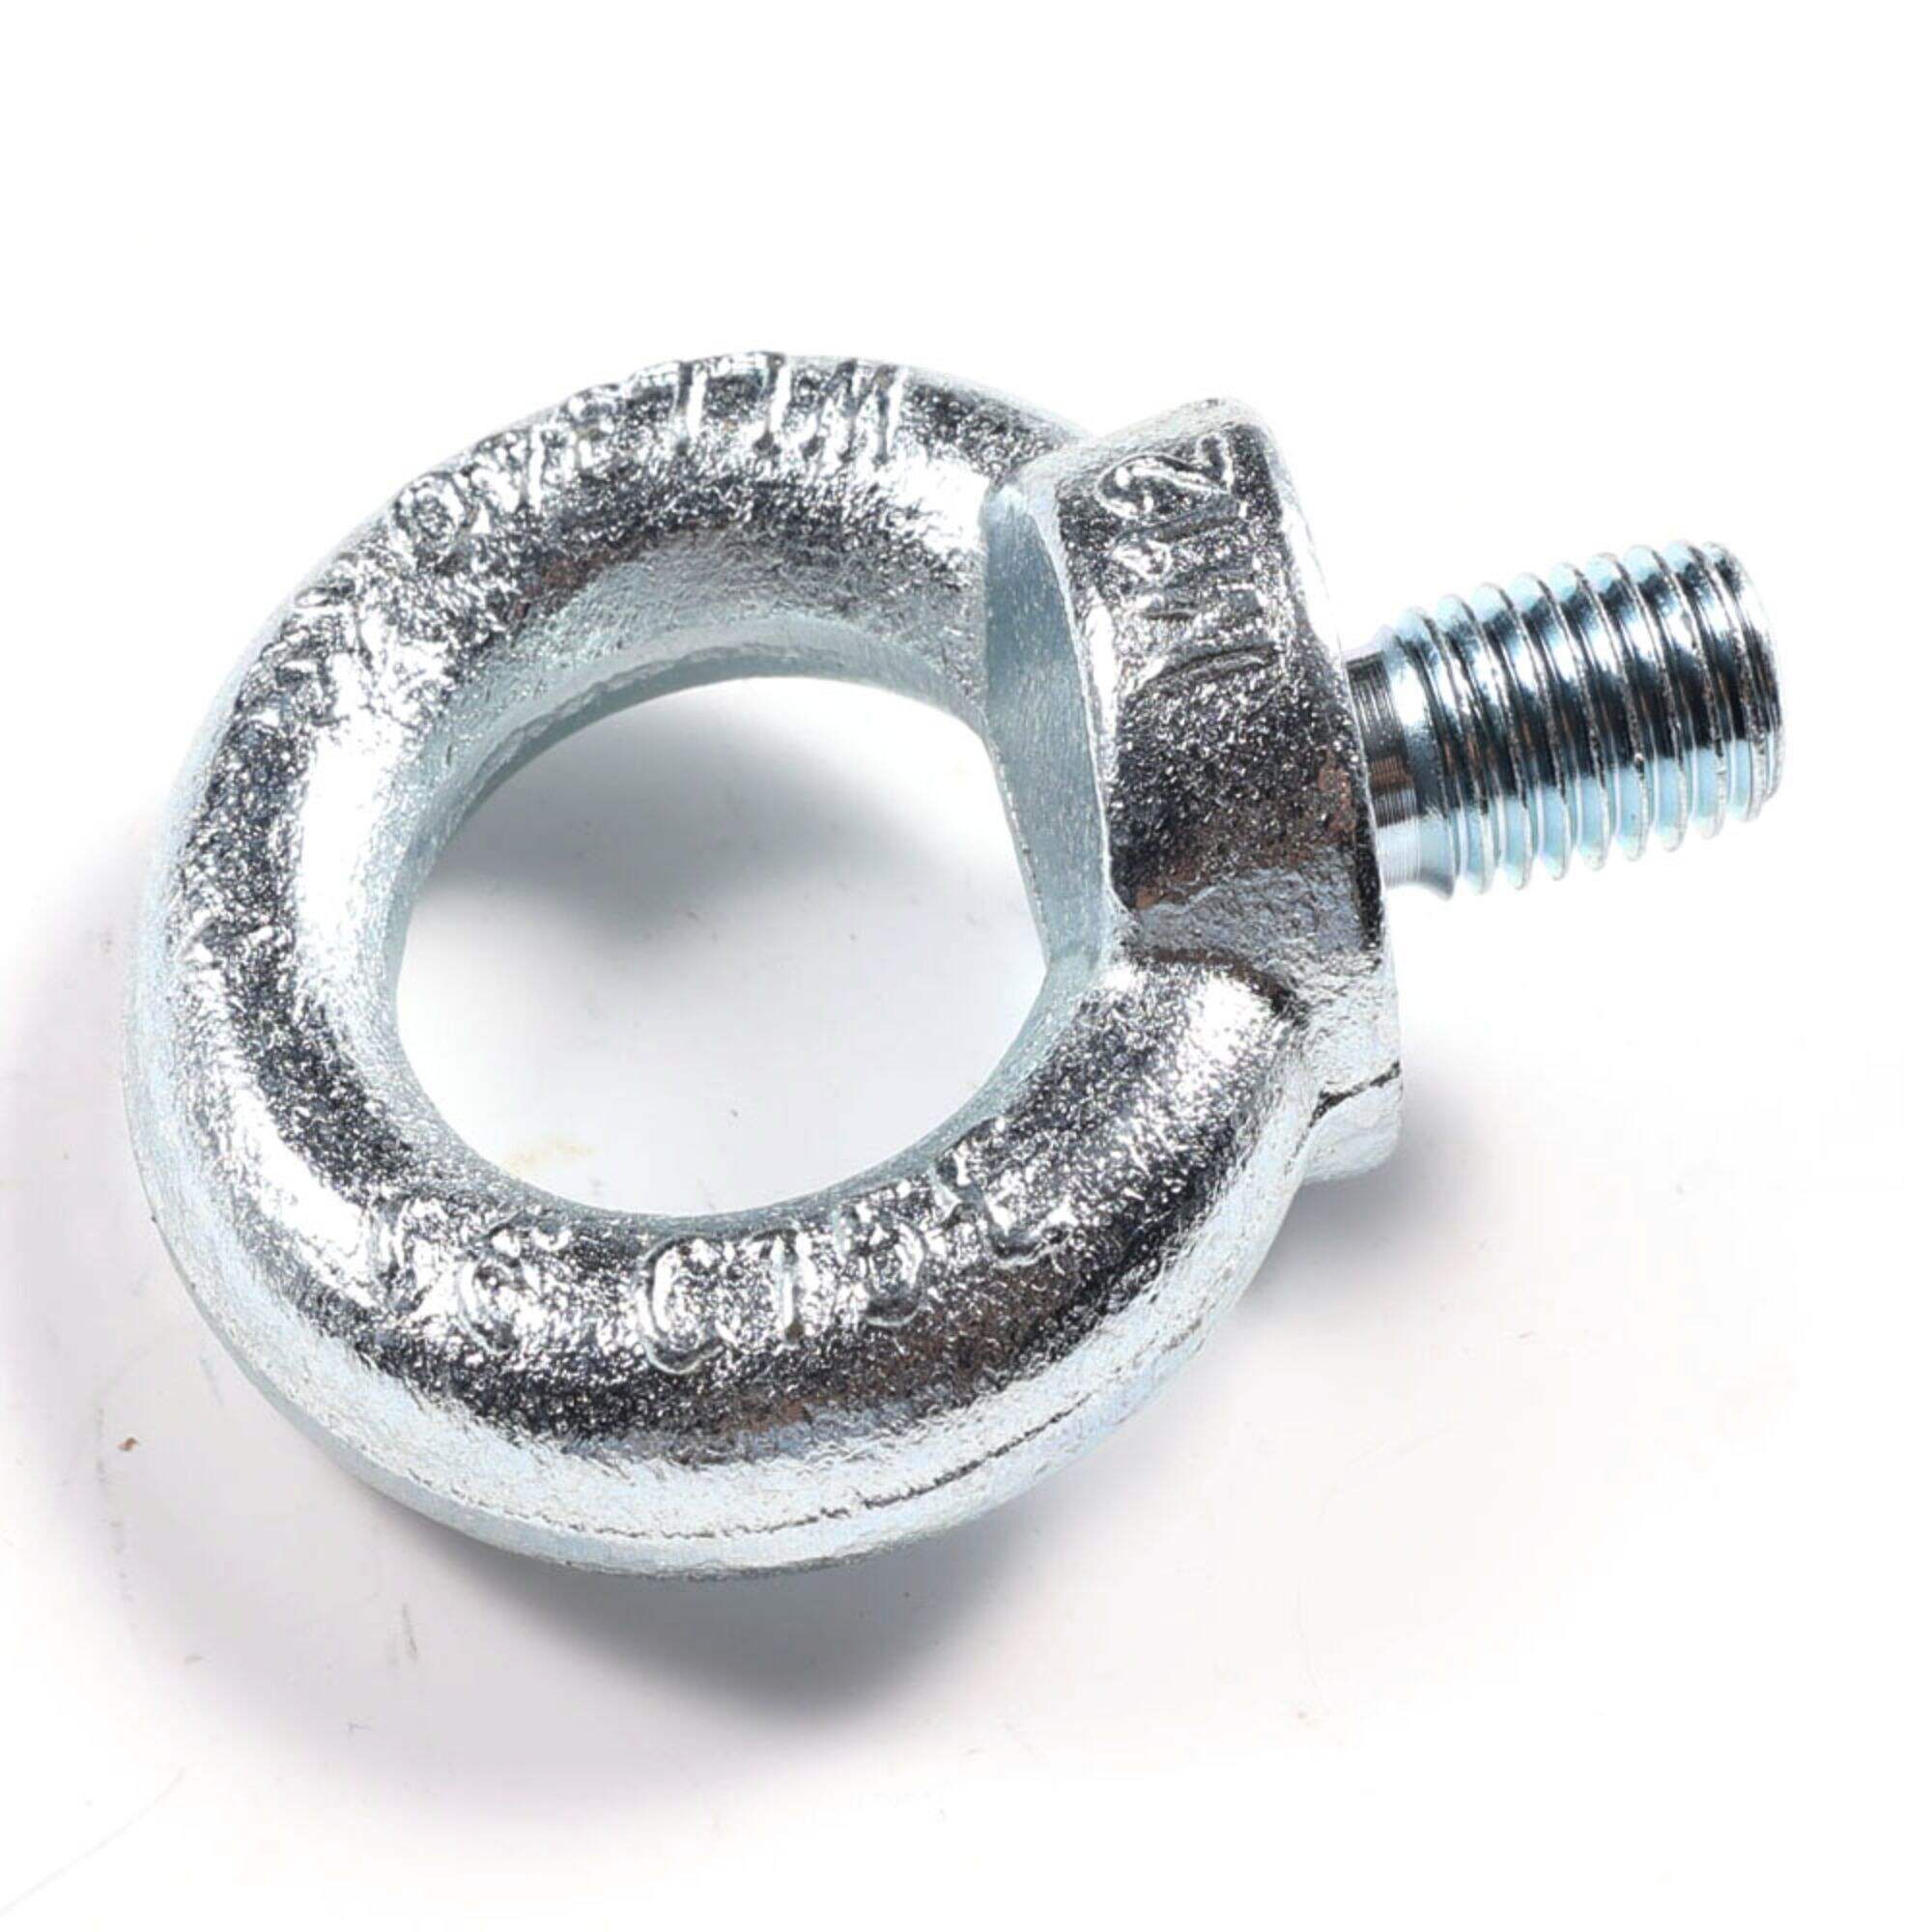 18-8 Stainless steel Lifting Eye Nut DIN582